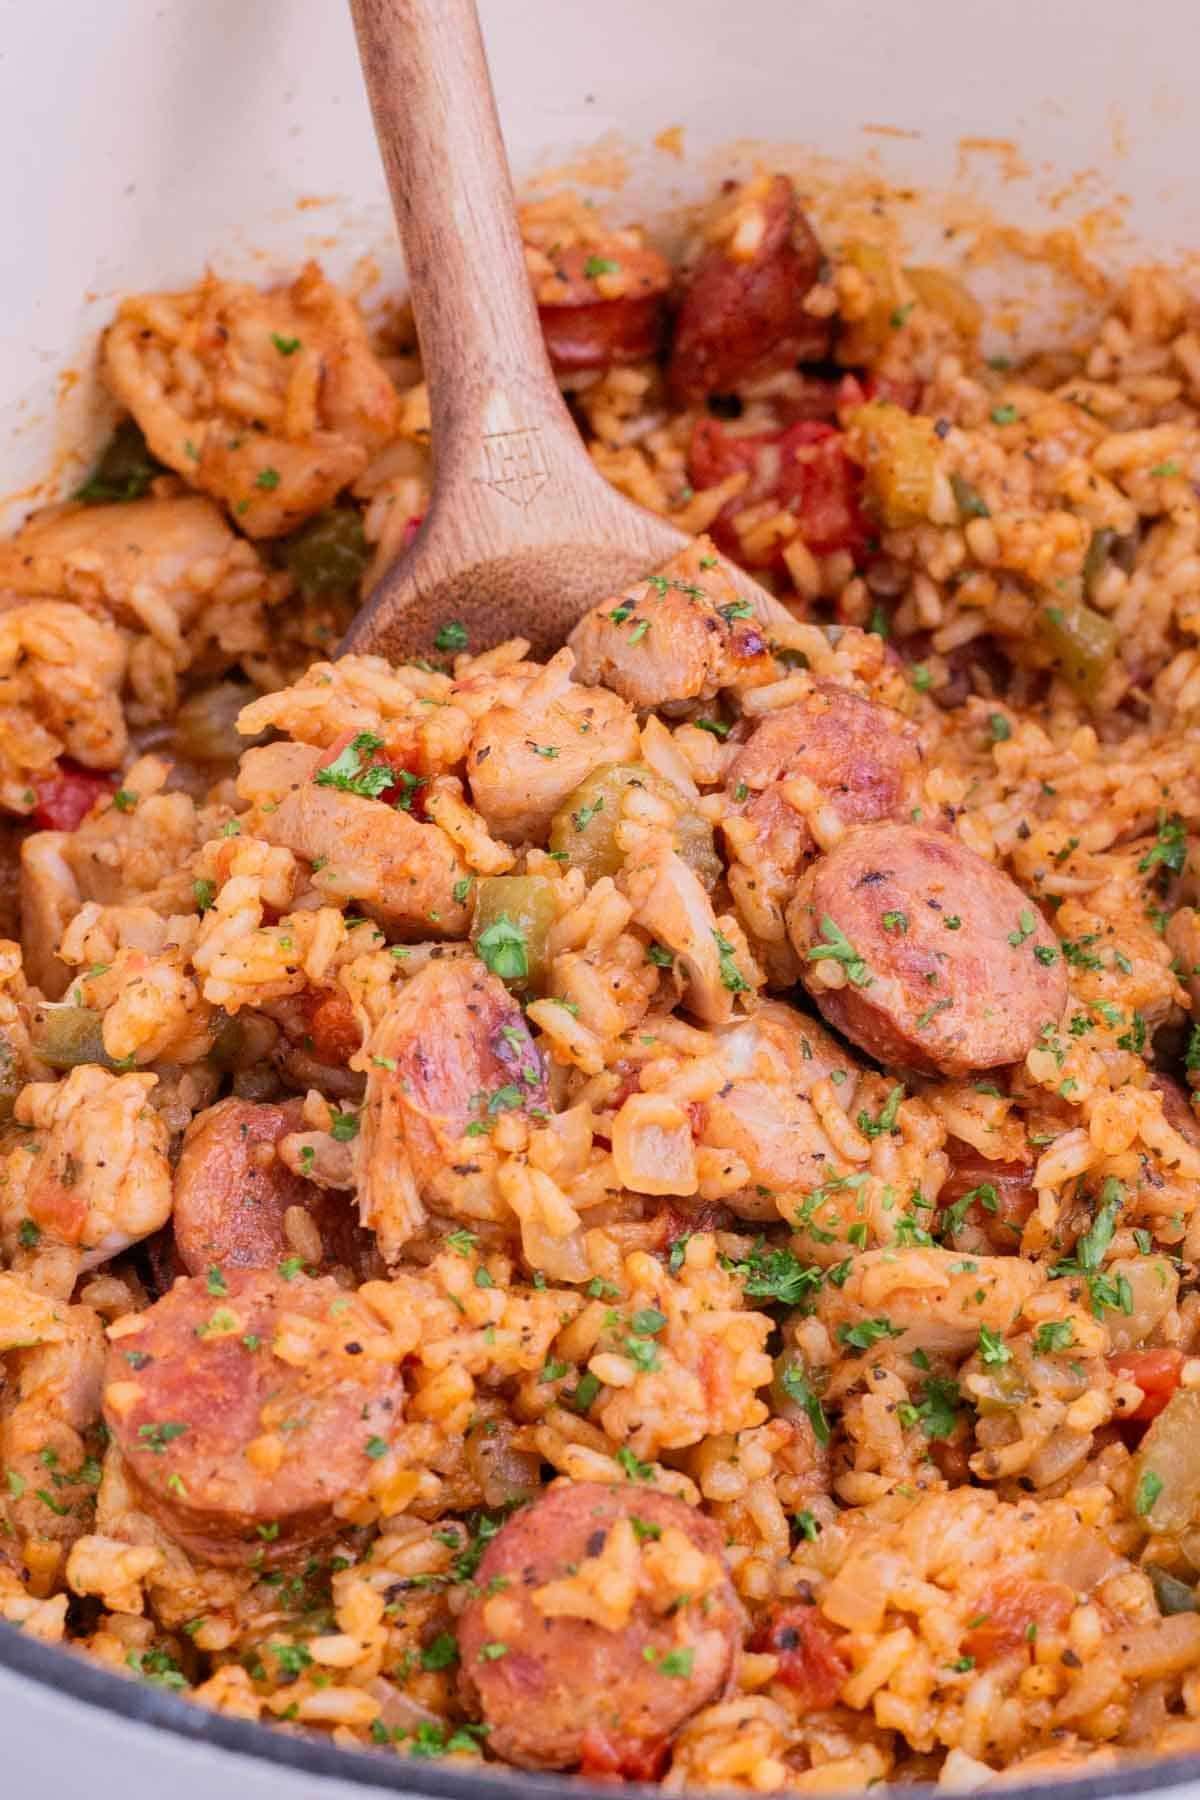 Jambalaya is filled with rice, chicken, and sausage and seasoned with Cajun spices.